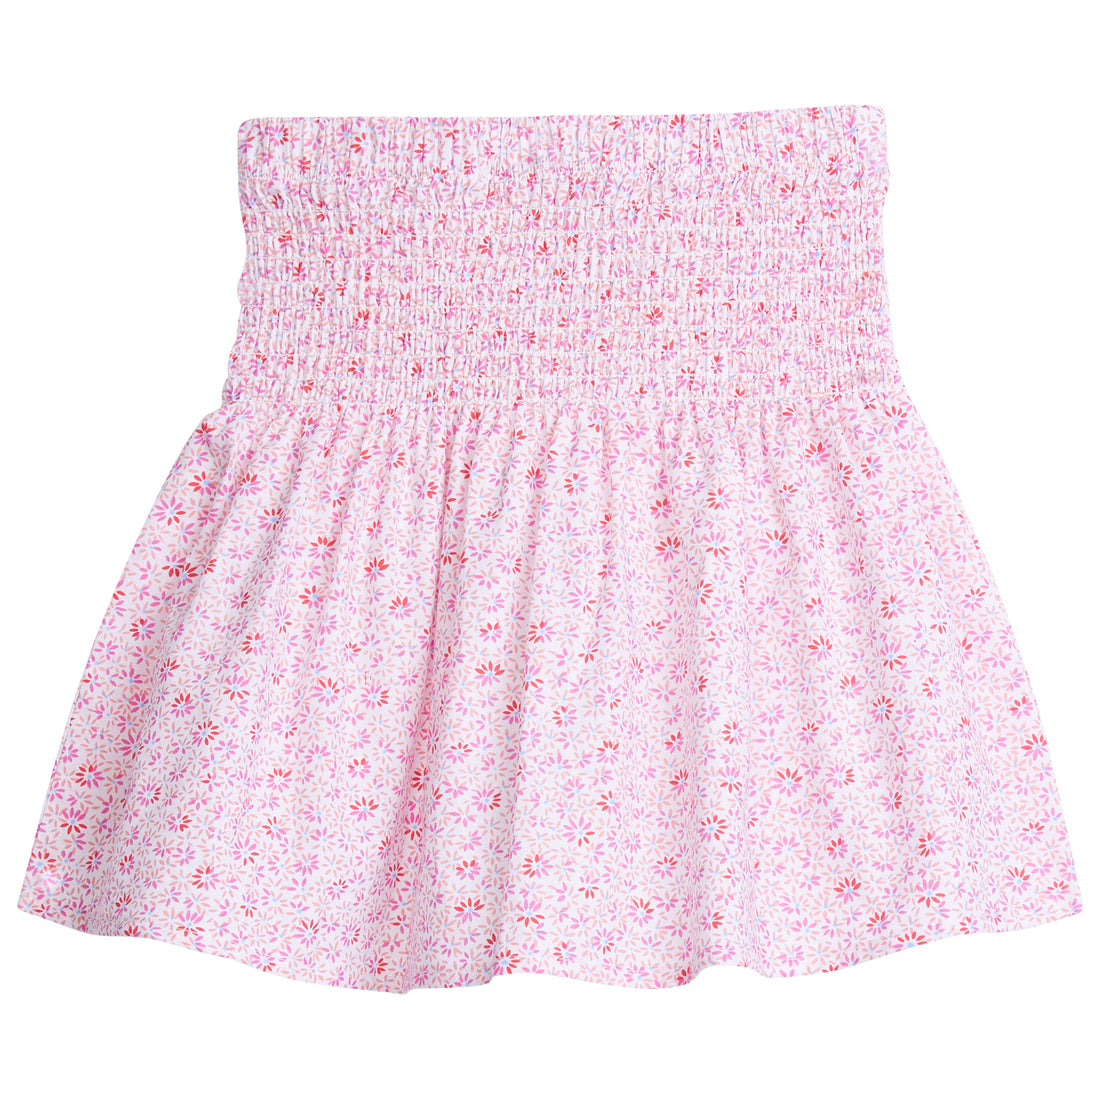 Tween skirt with ruching across top half, covered in light pink and hot pink daisies.